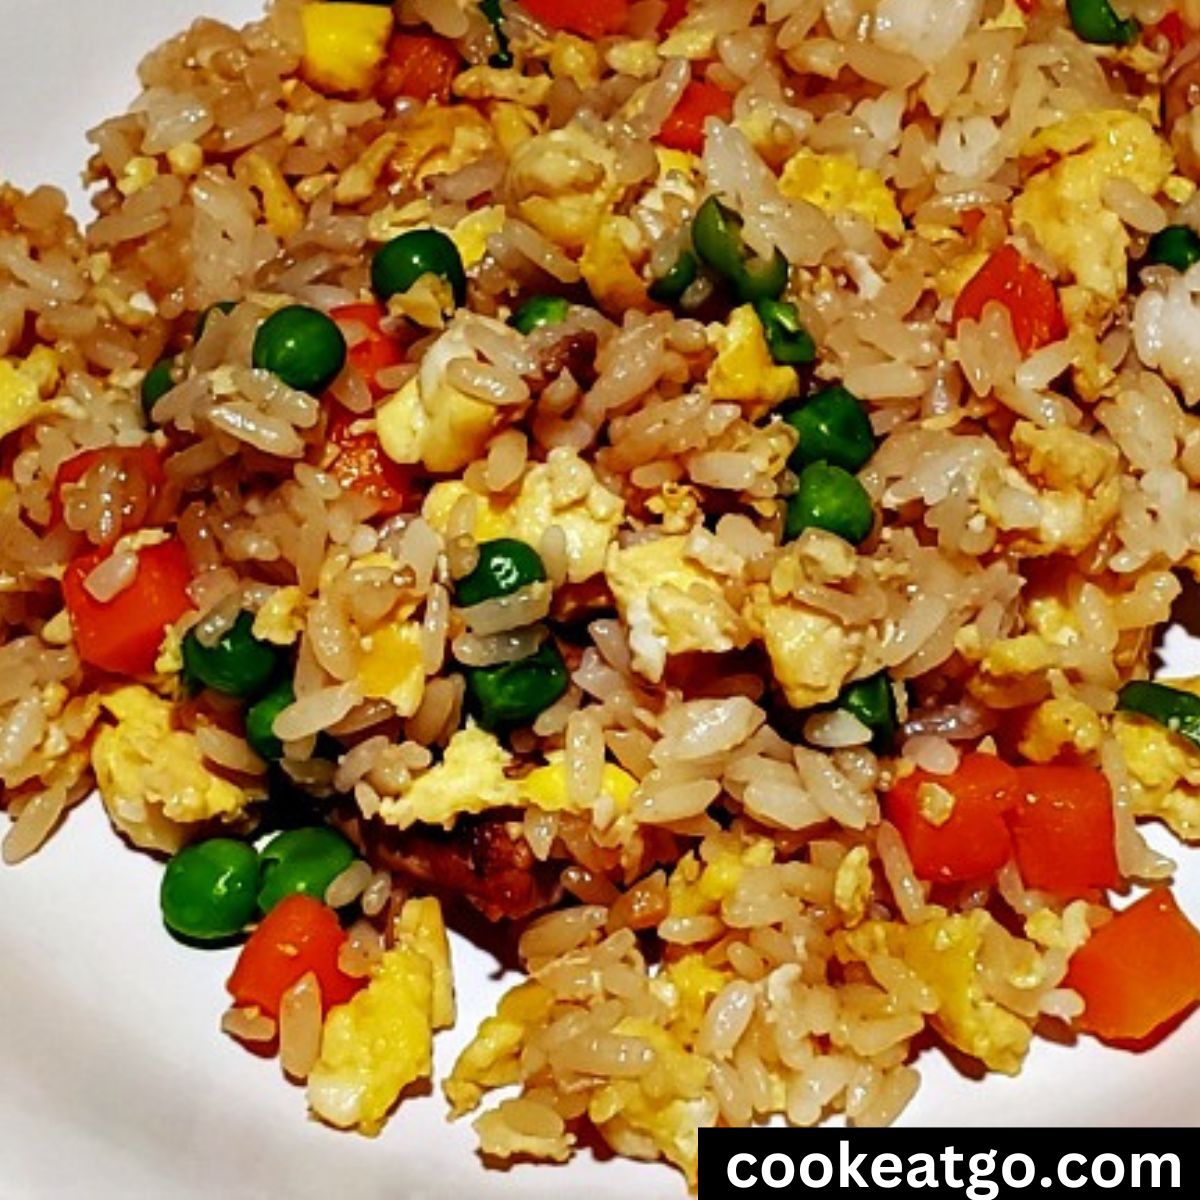 Pork fried rice cooked and served on a white plate 